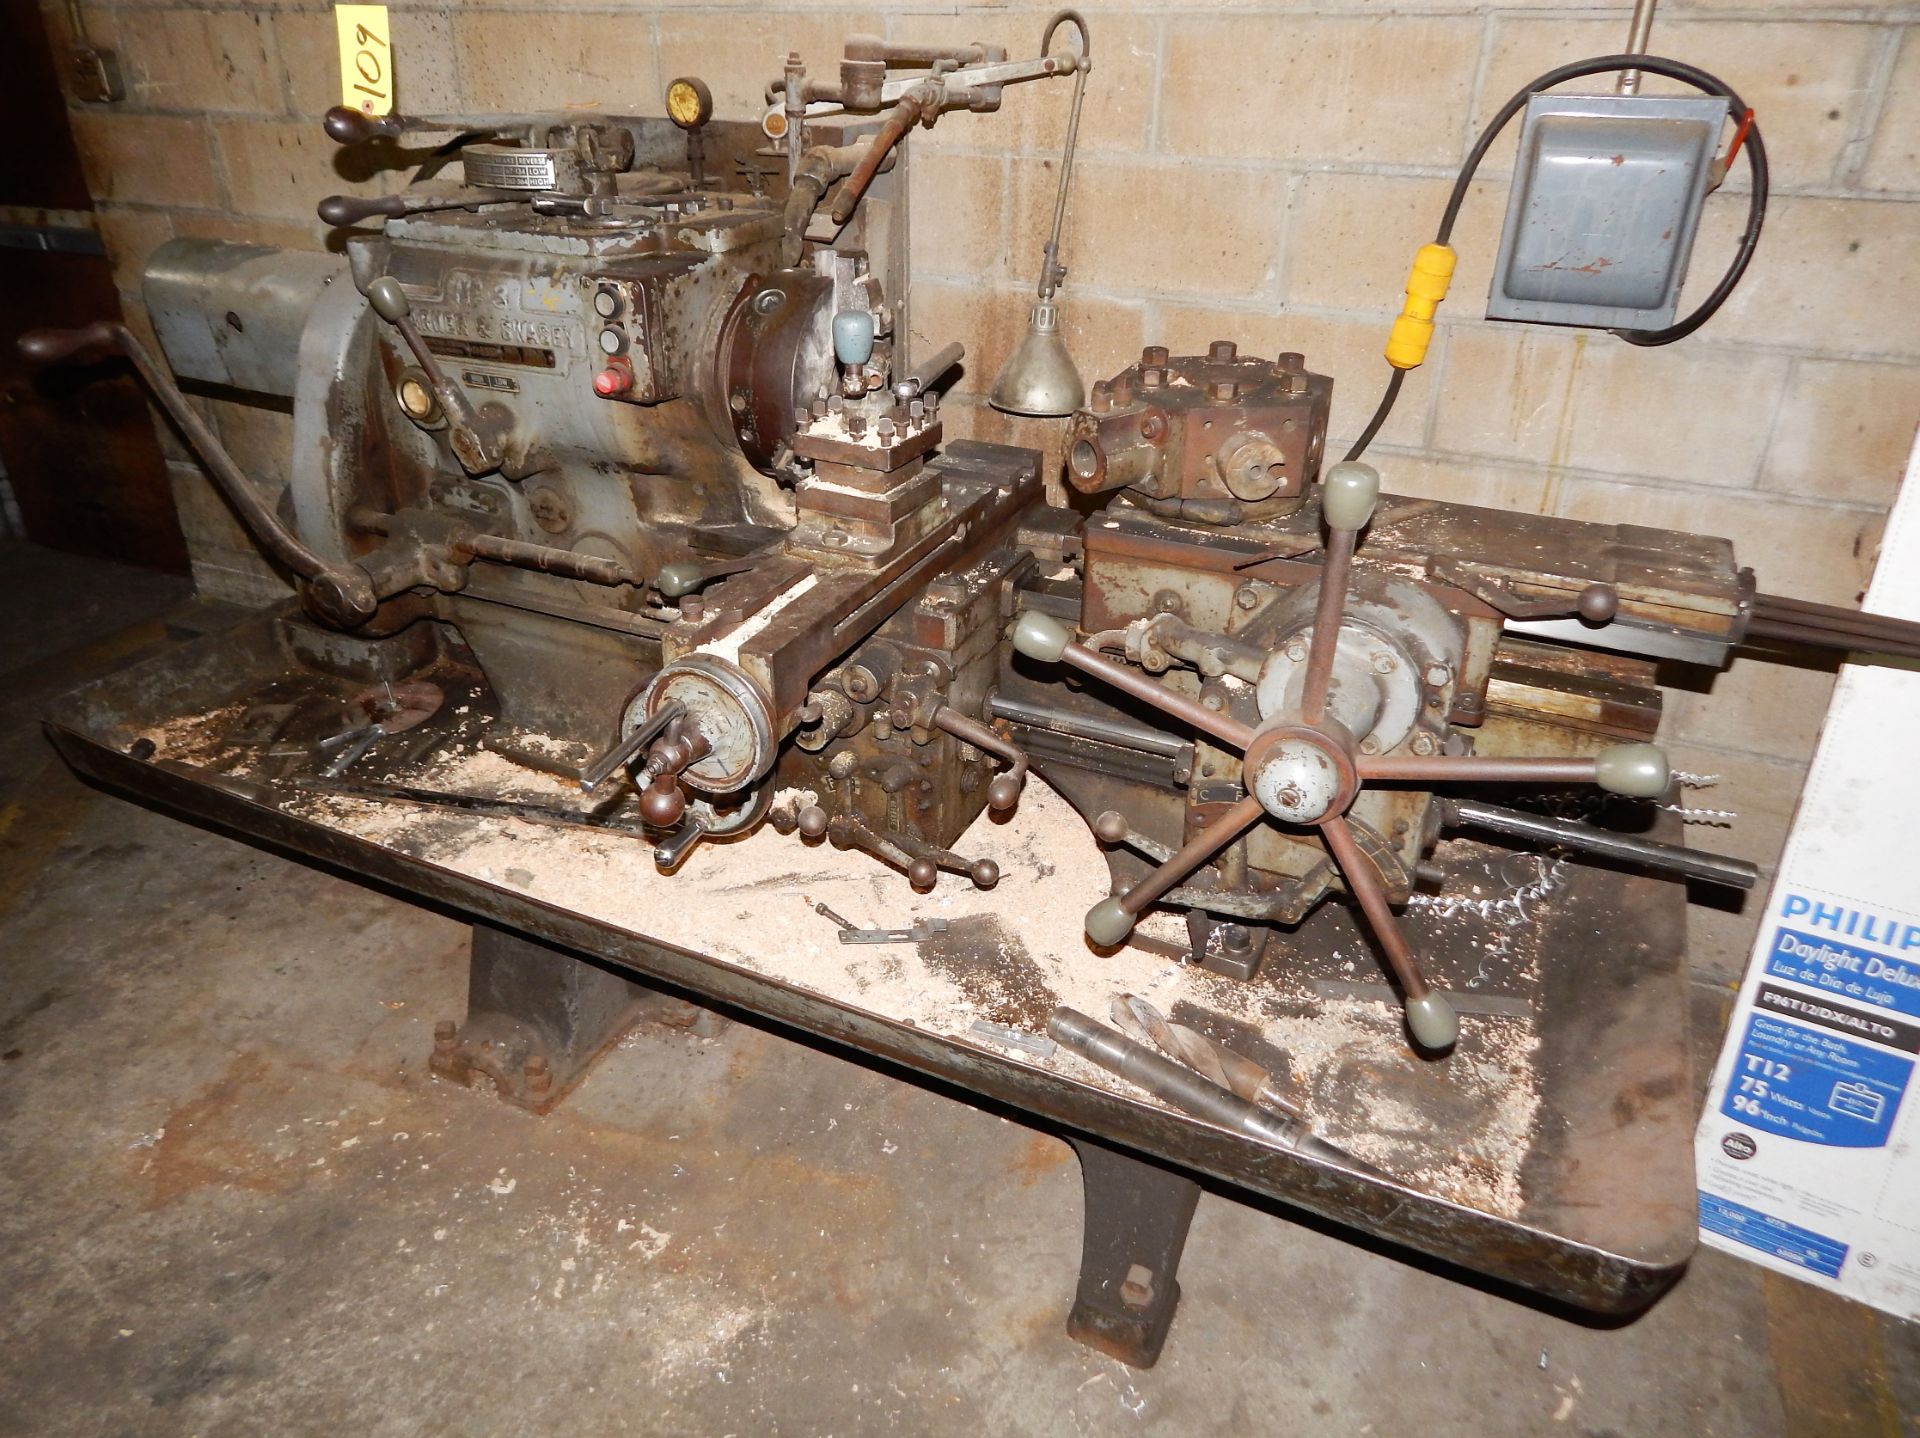 WARNER & SWASEY MDL. M-1200 NO. 3 6-POSITION TURREY LATHE WITH 10" 3-JAW CHUCK, LOT NO. 296, 67-1480